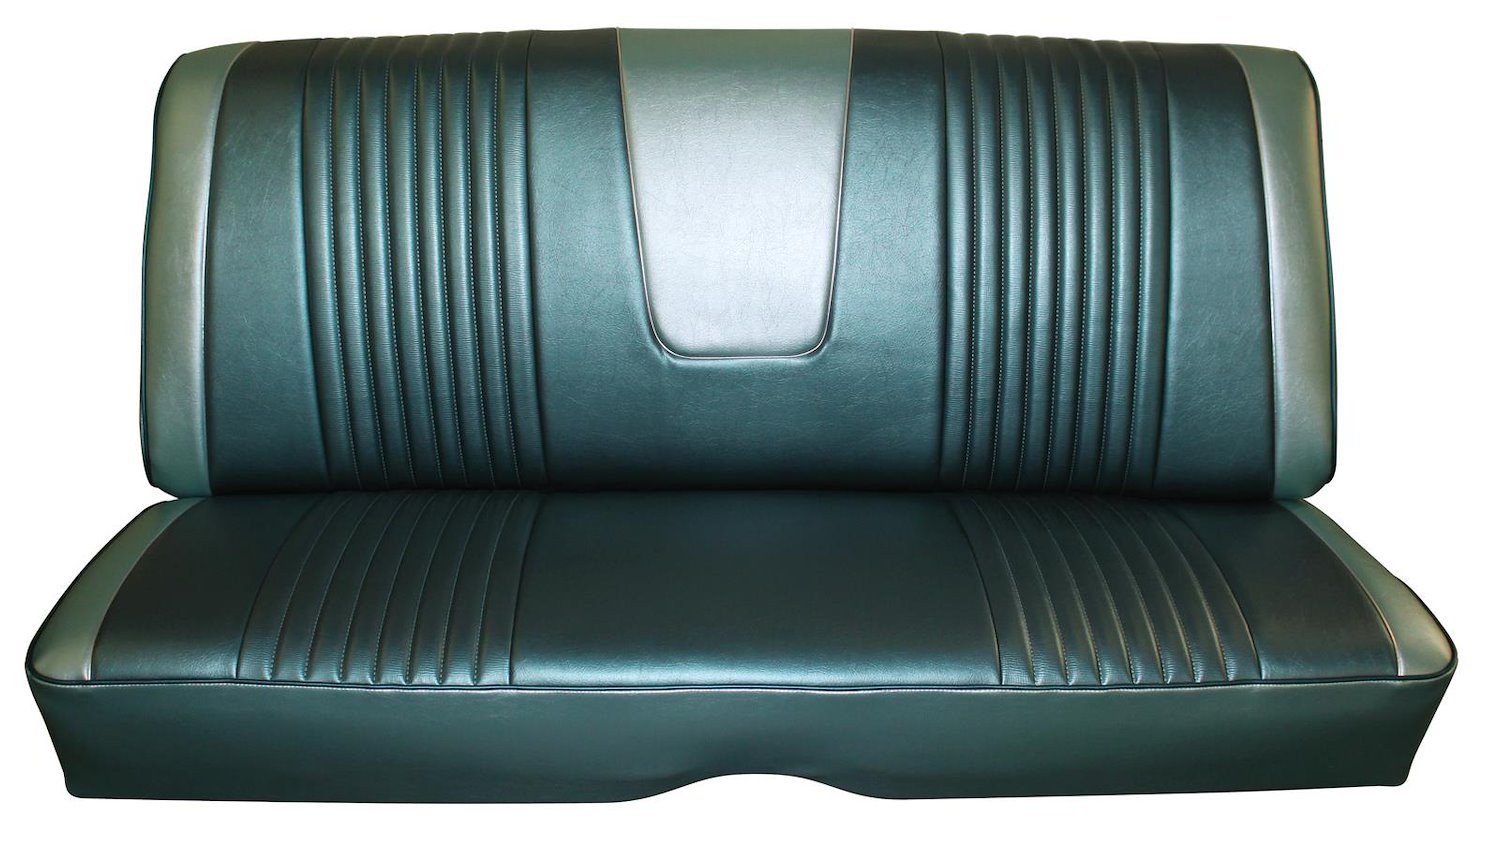 1963 Ford Galaxie 500 Fastback 2-Tone Interior Rear Bench Seat.